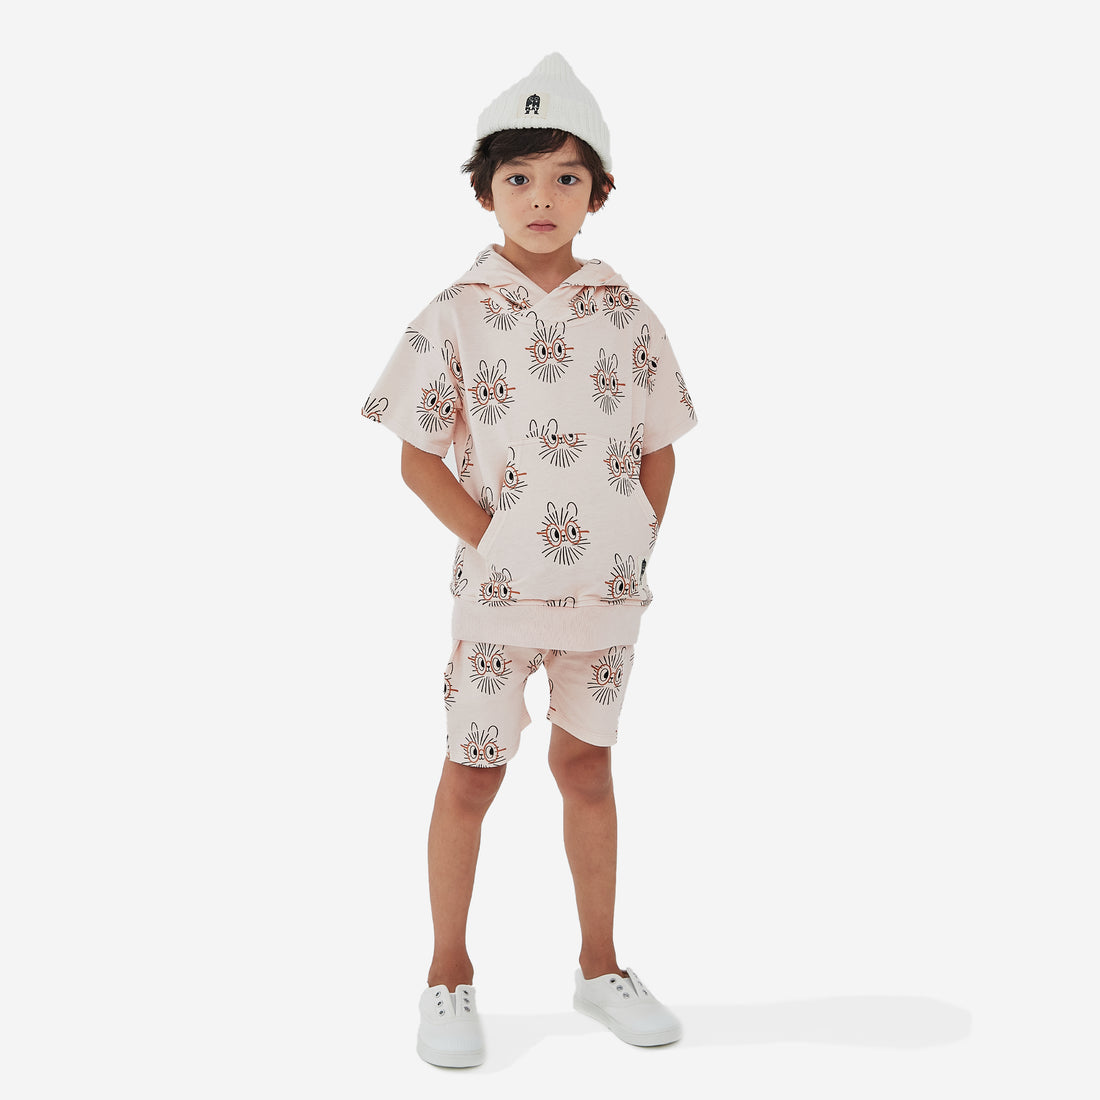 The Hedgehog print boy short has a light peach background with abstract hedgehog faces with orange oval eye glasses.